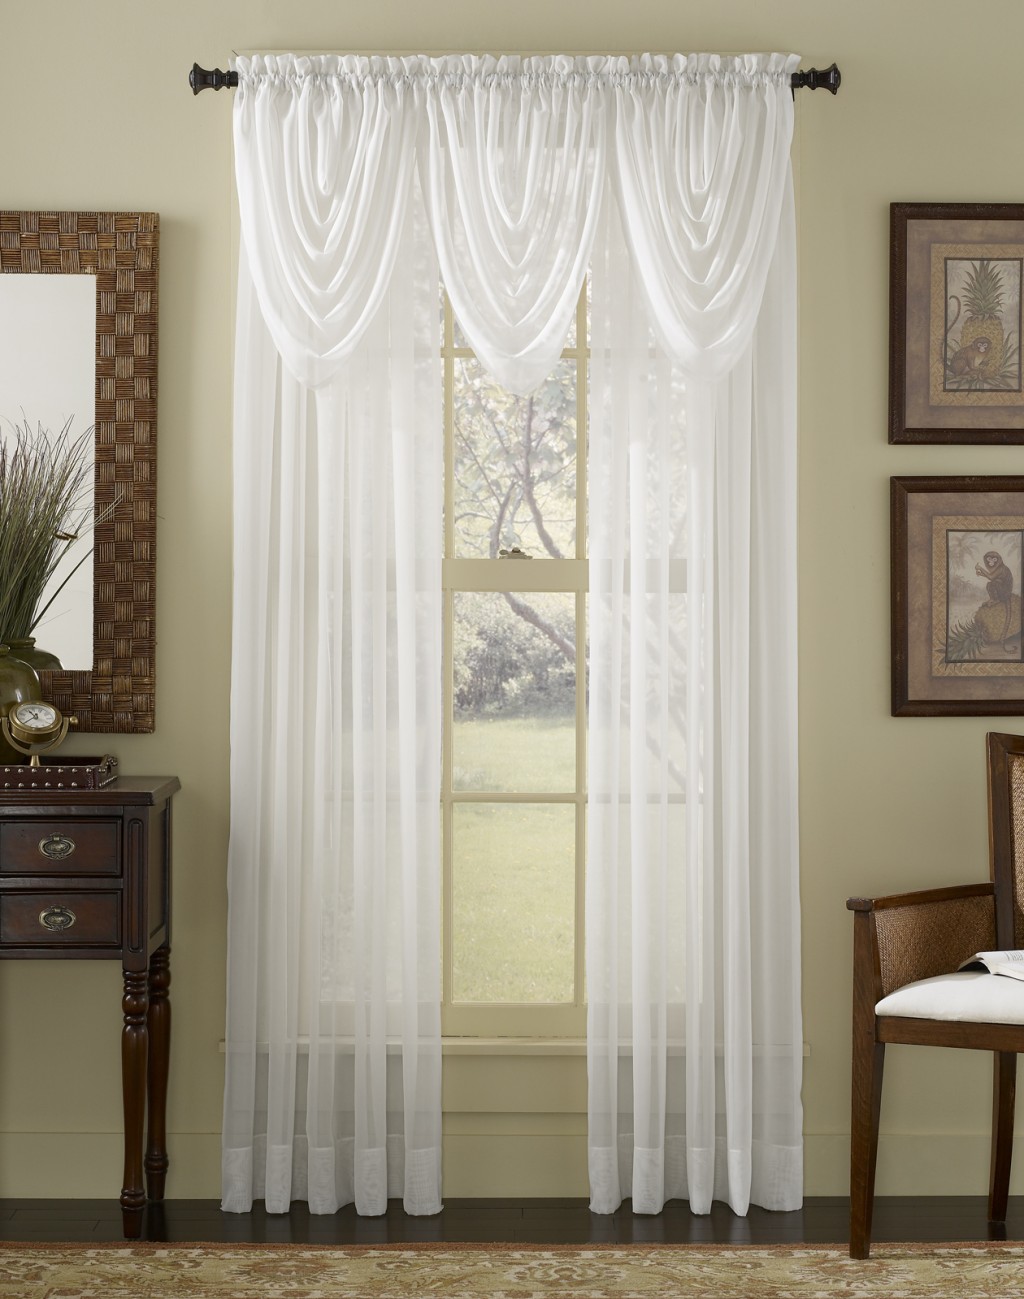 White Valance Curtains in Curtain